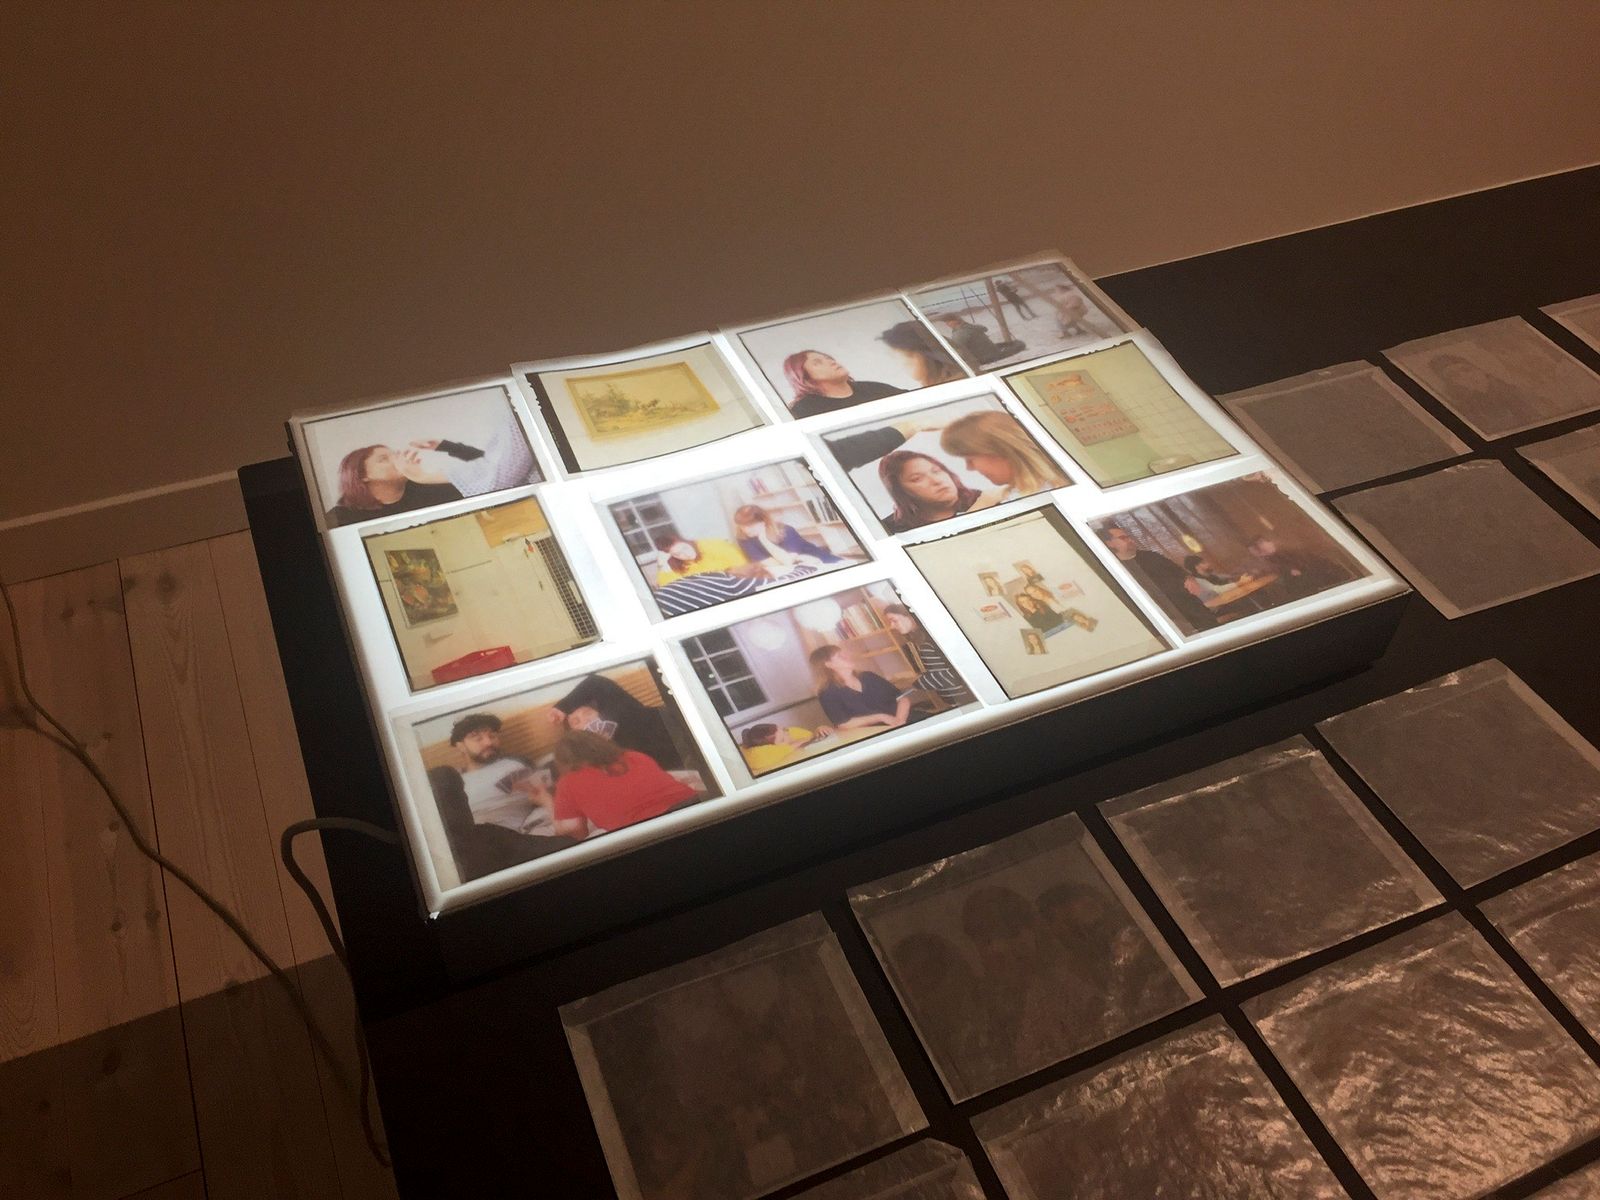 Detail view of some large format slides produced by Deanna Pizzitelli during her stay in Landskrona.